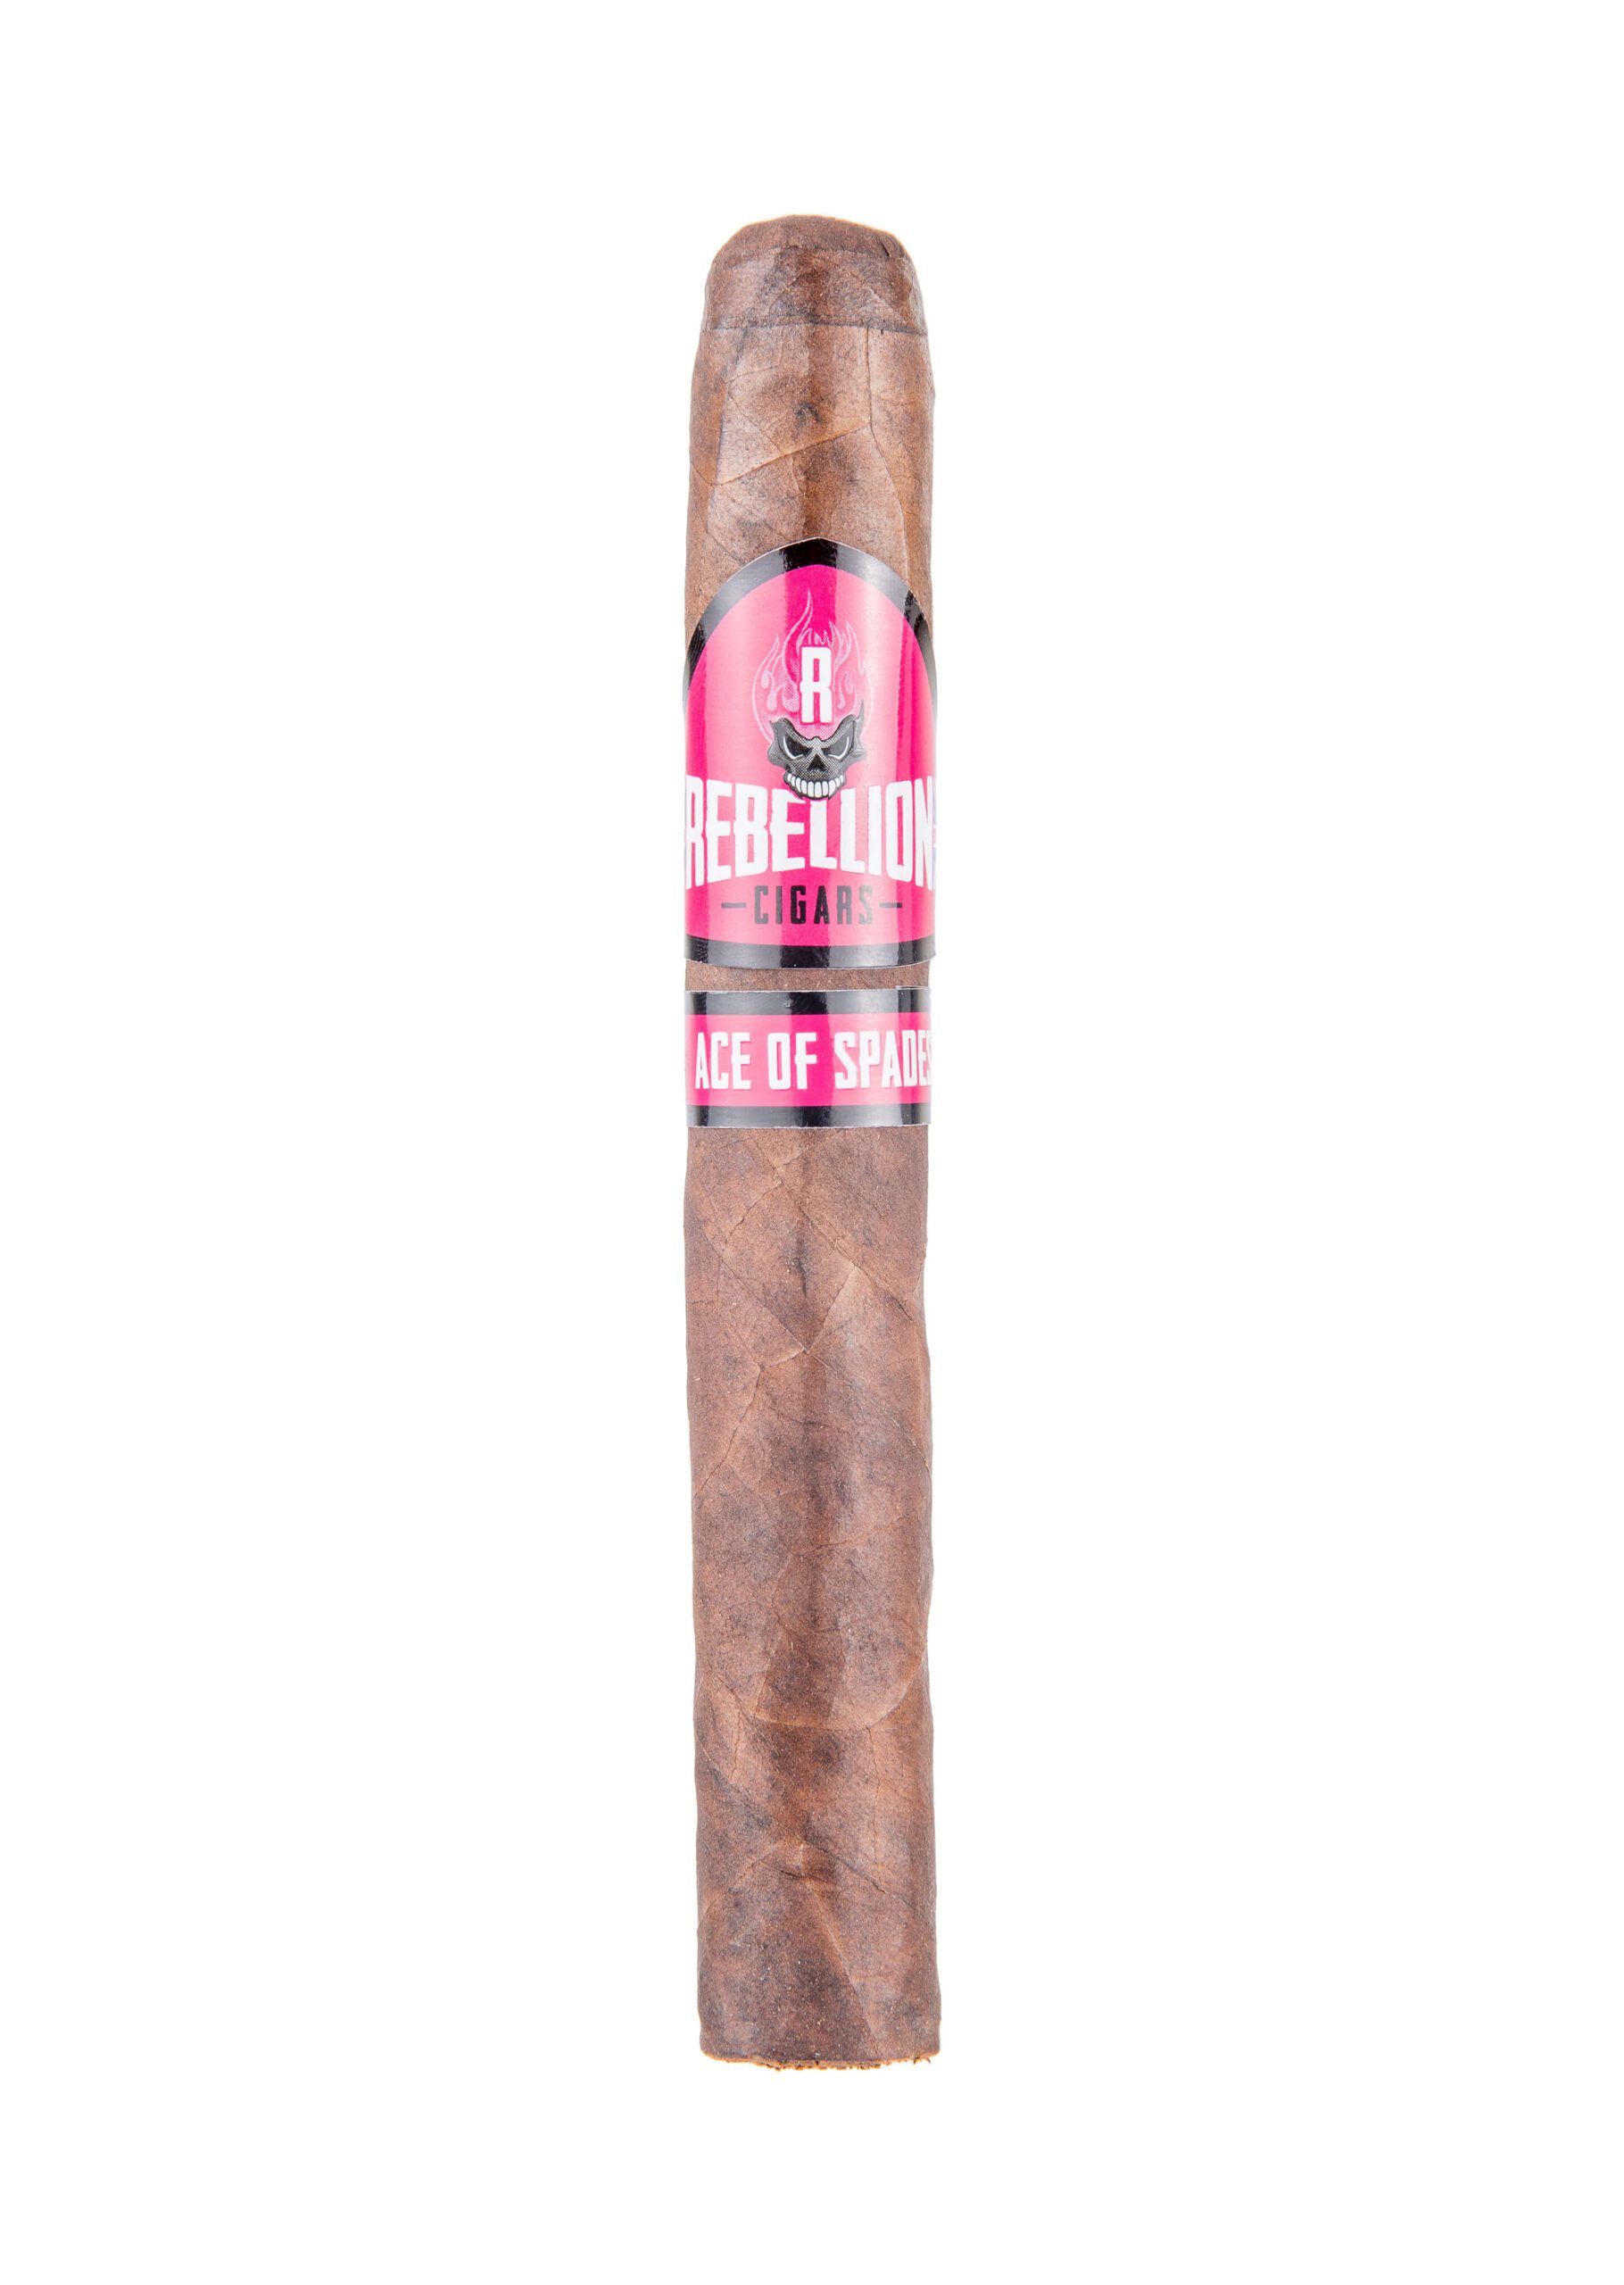 Rebellion Cigars- Ace of Spades